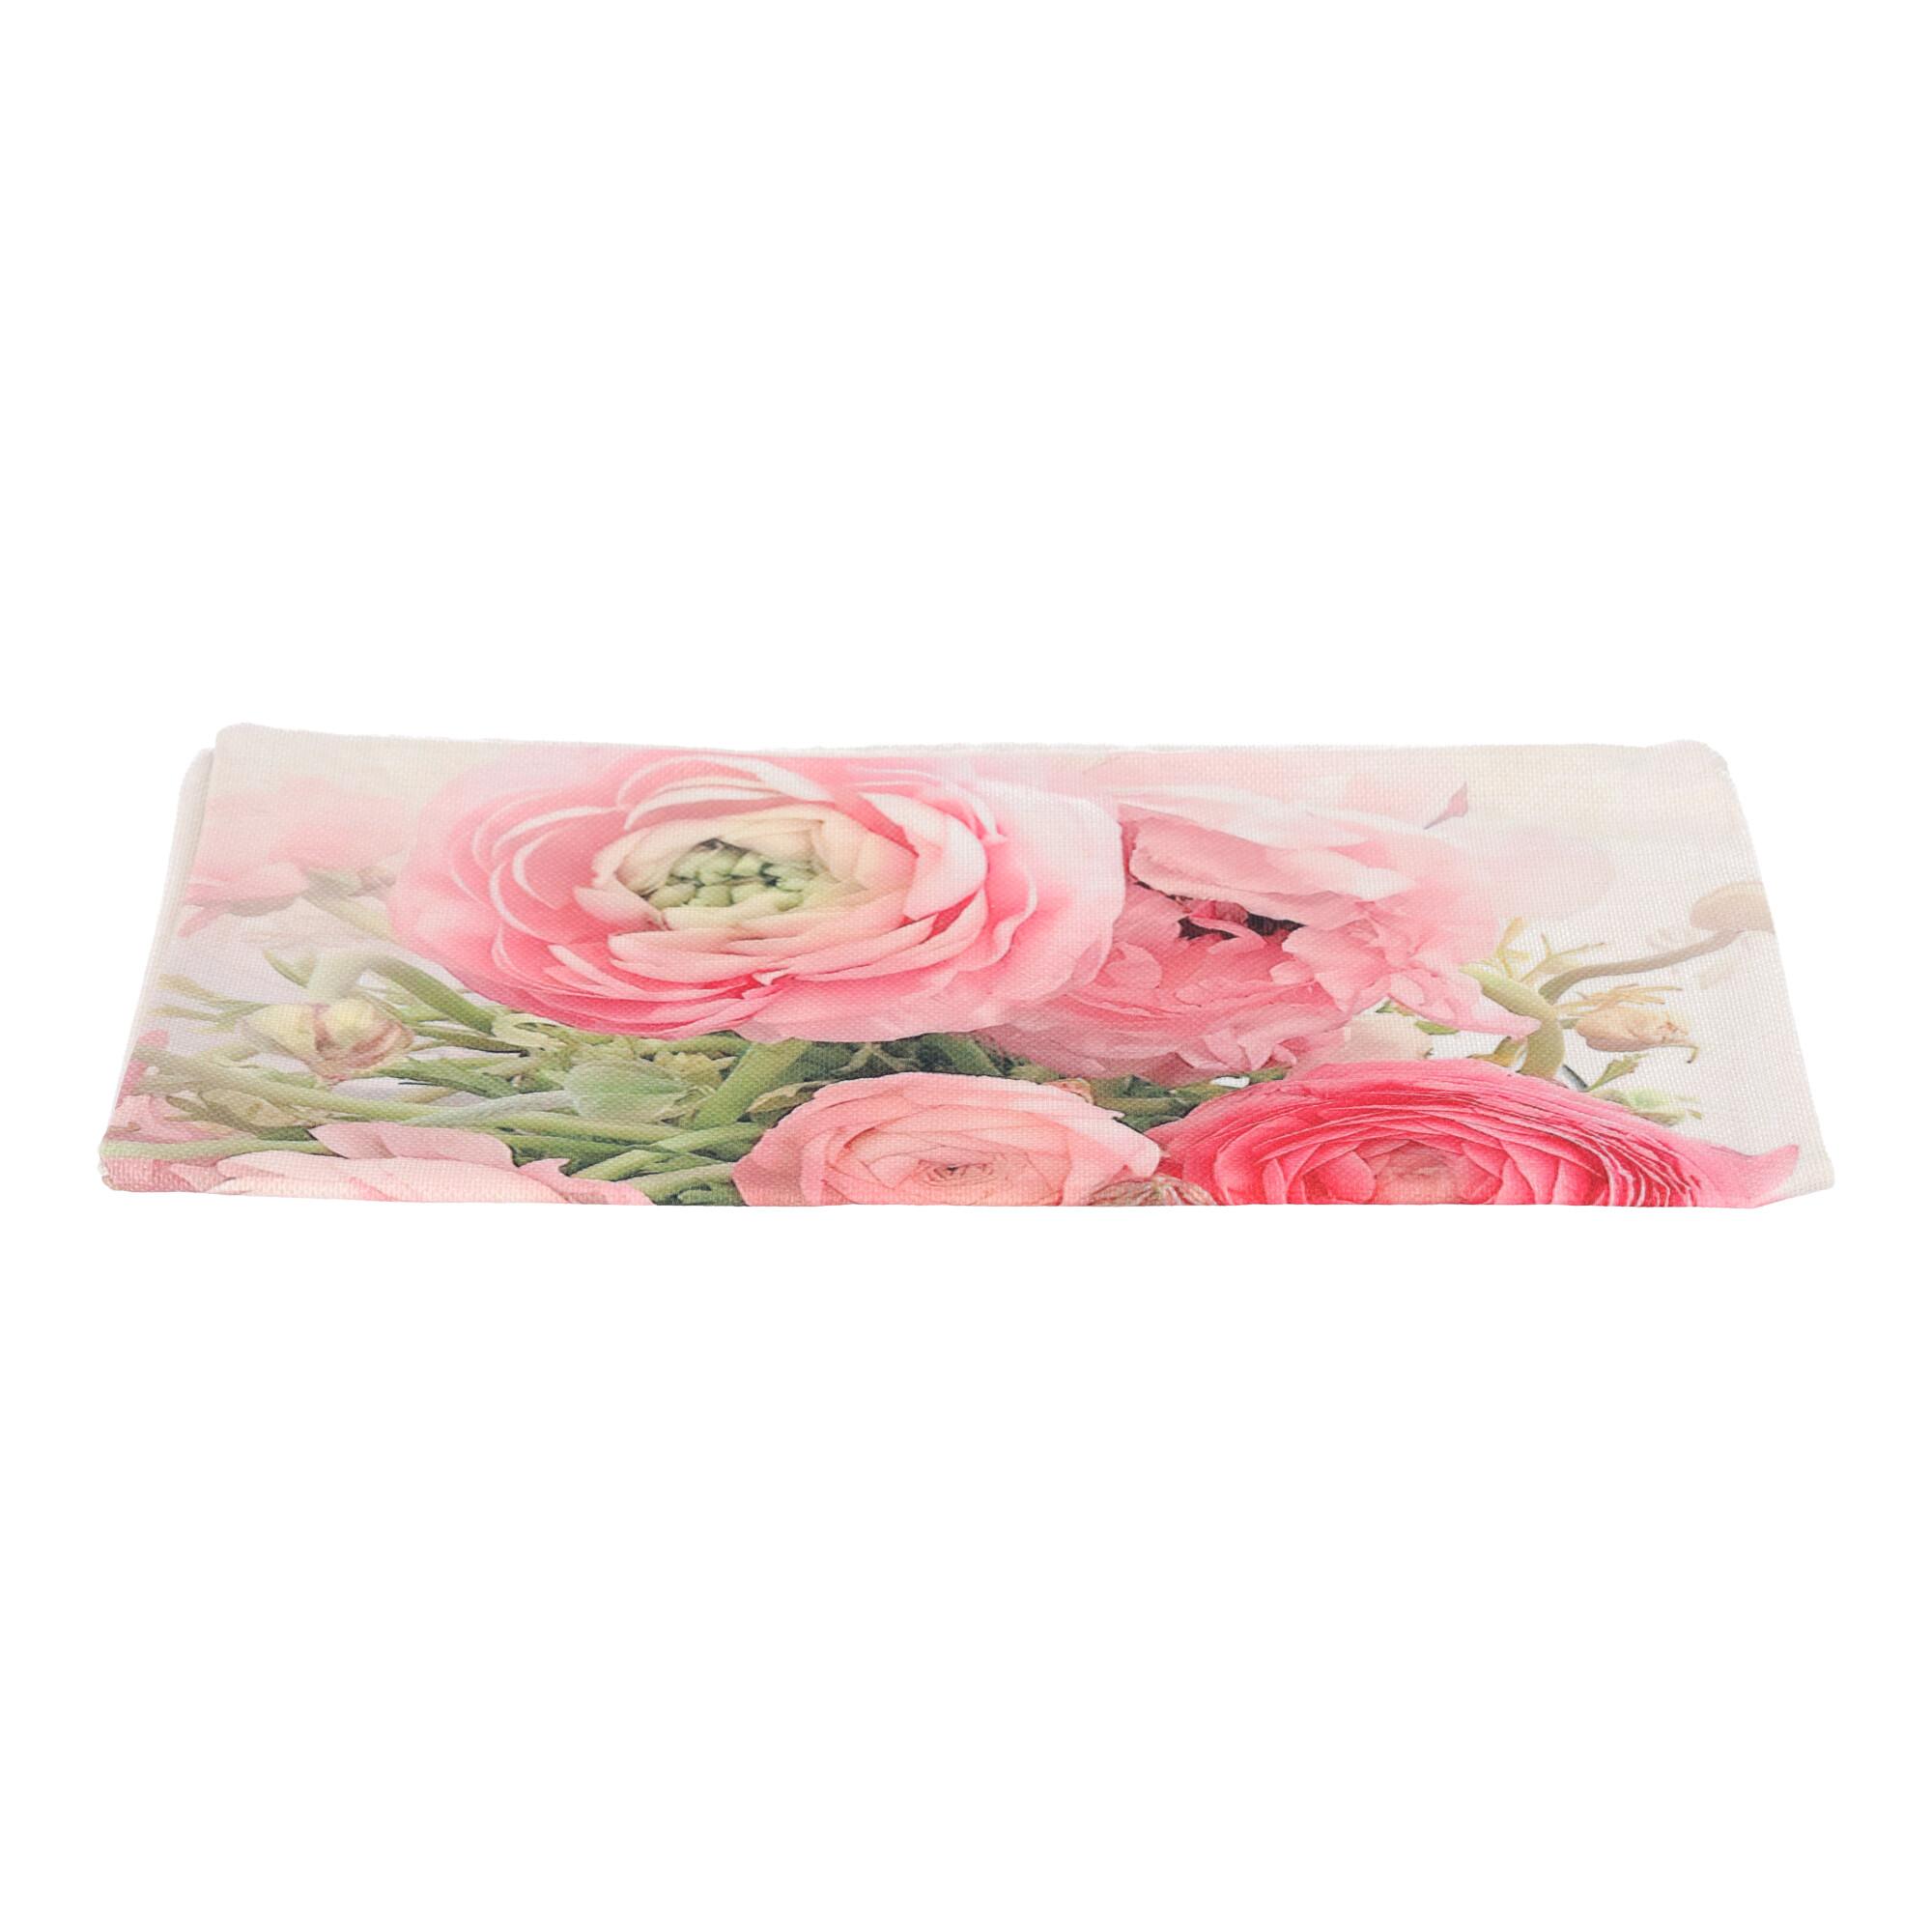 Decorative pillowcase with flowers - pattern I